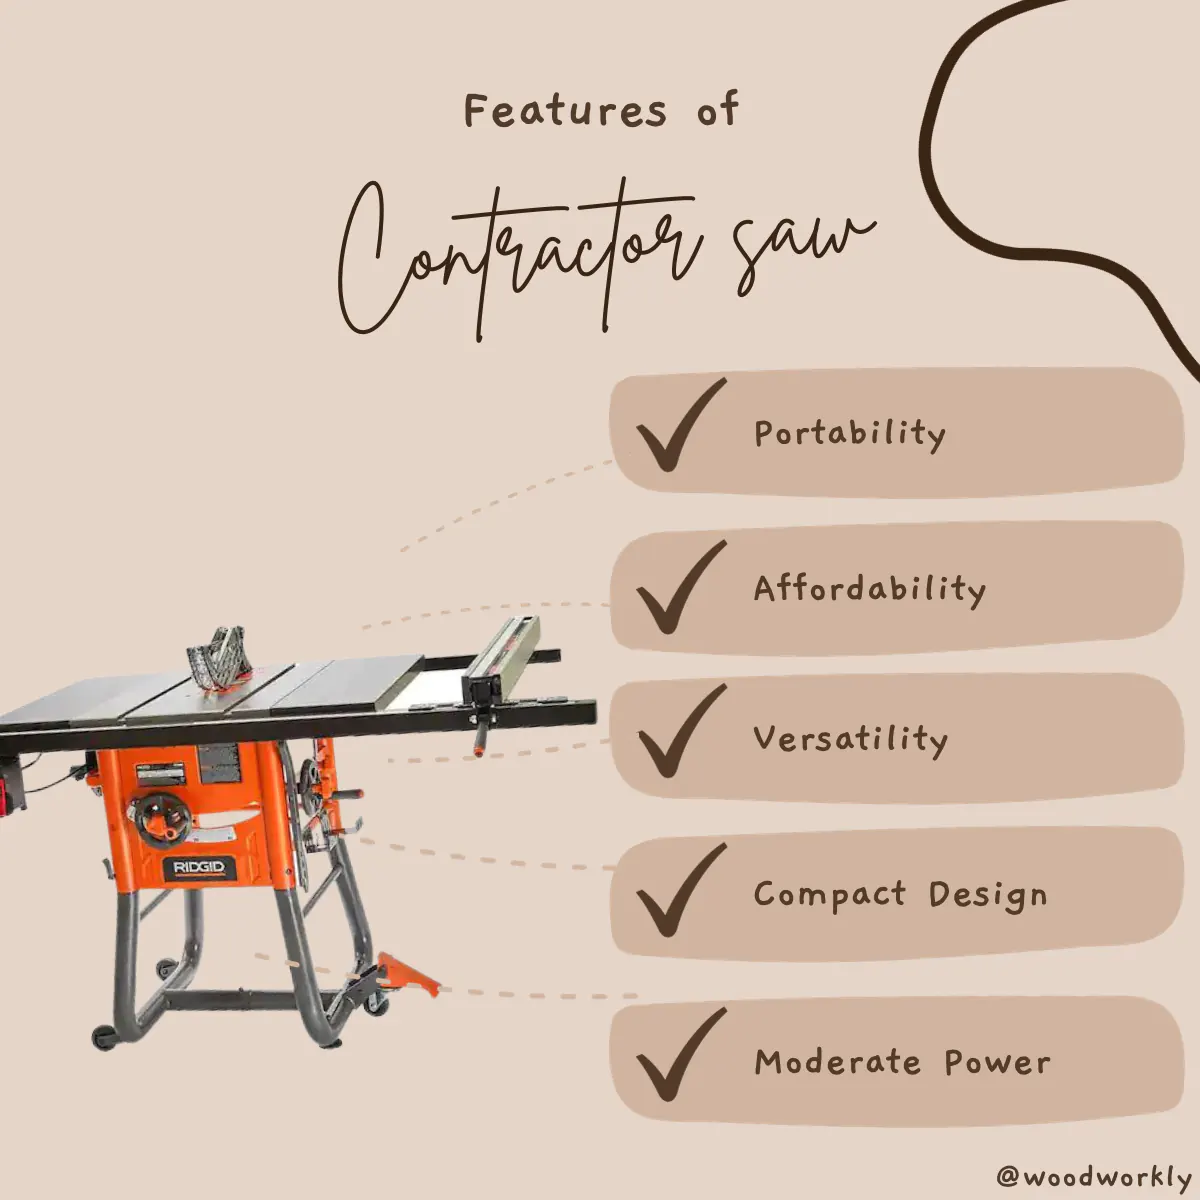 Features of Contractor Saw